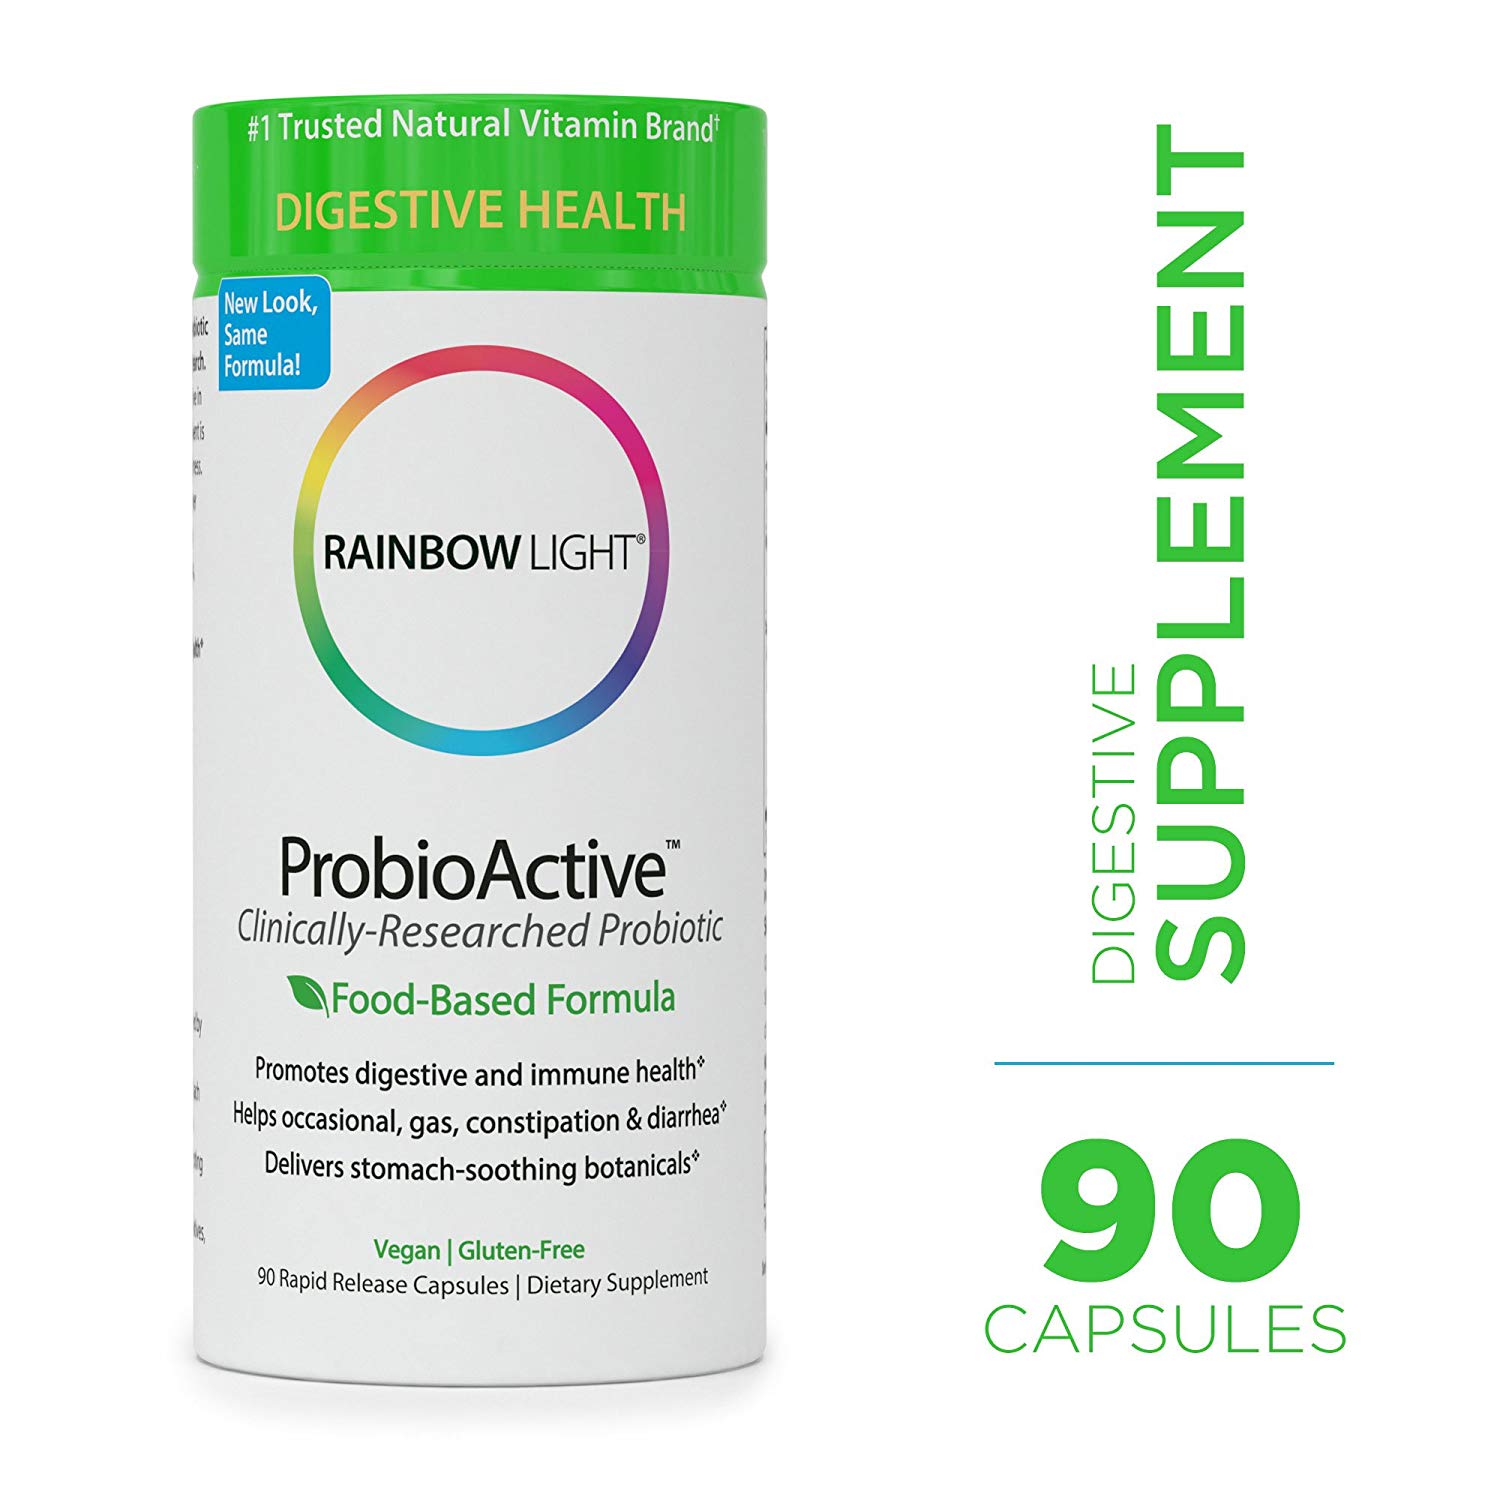 Contains Bio-Active Probiotic Defense, a unique multifunction strain of 1 billion Lactobacillus Sporogenes that are 100% viable with a unique outer layer that protects delivery through the stomach and into the intestines where they are broken down to support optimal digestion, absorption of nutrients, and removal of toxins and wastes